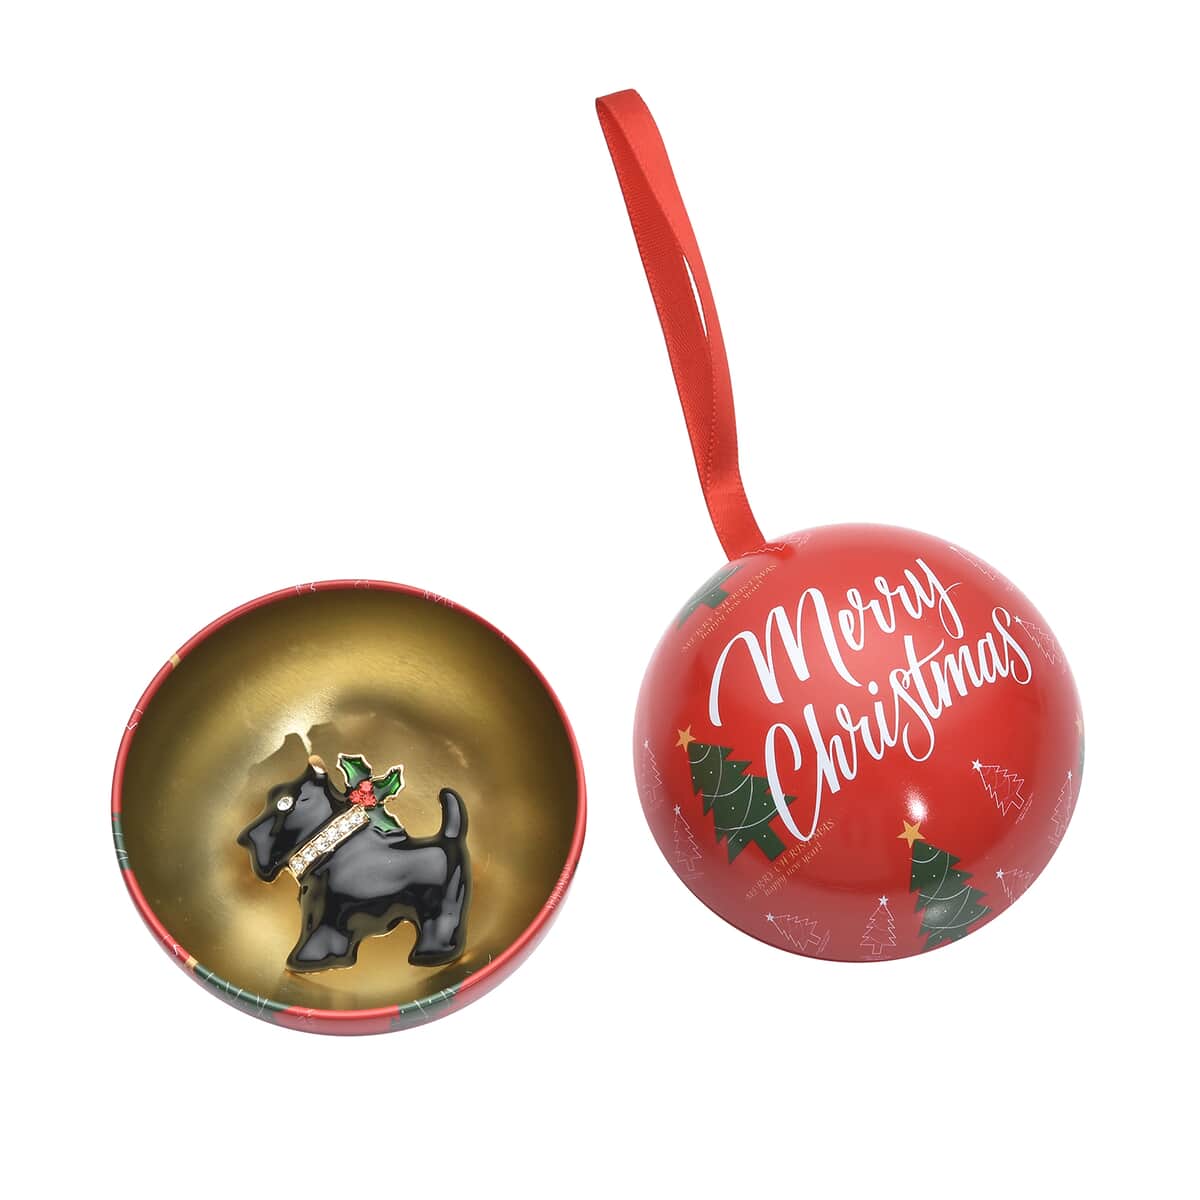 Merry Christmas Red Ornament Ball Packaging Gift Set with Red and White Austrian Crystal, Enameled Black Christmas Dog Brooch in Goldtone image number 2